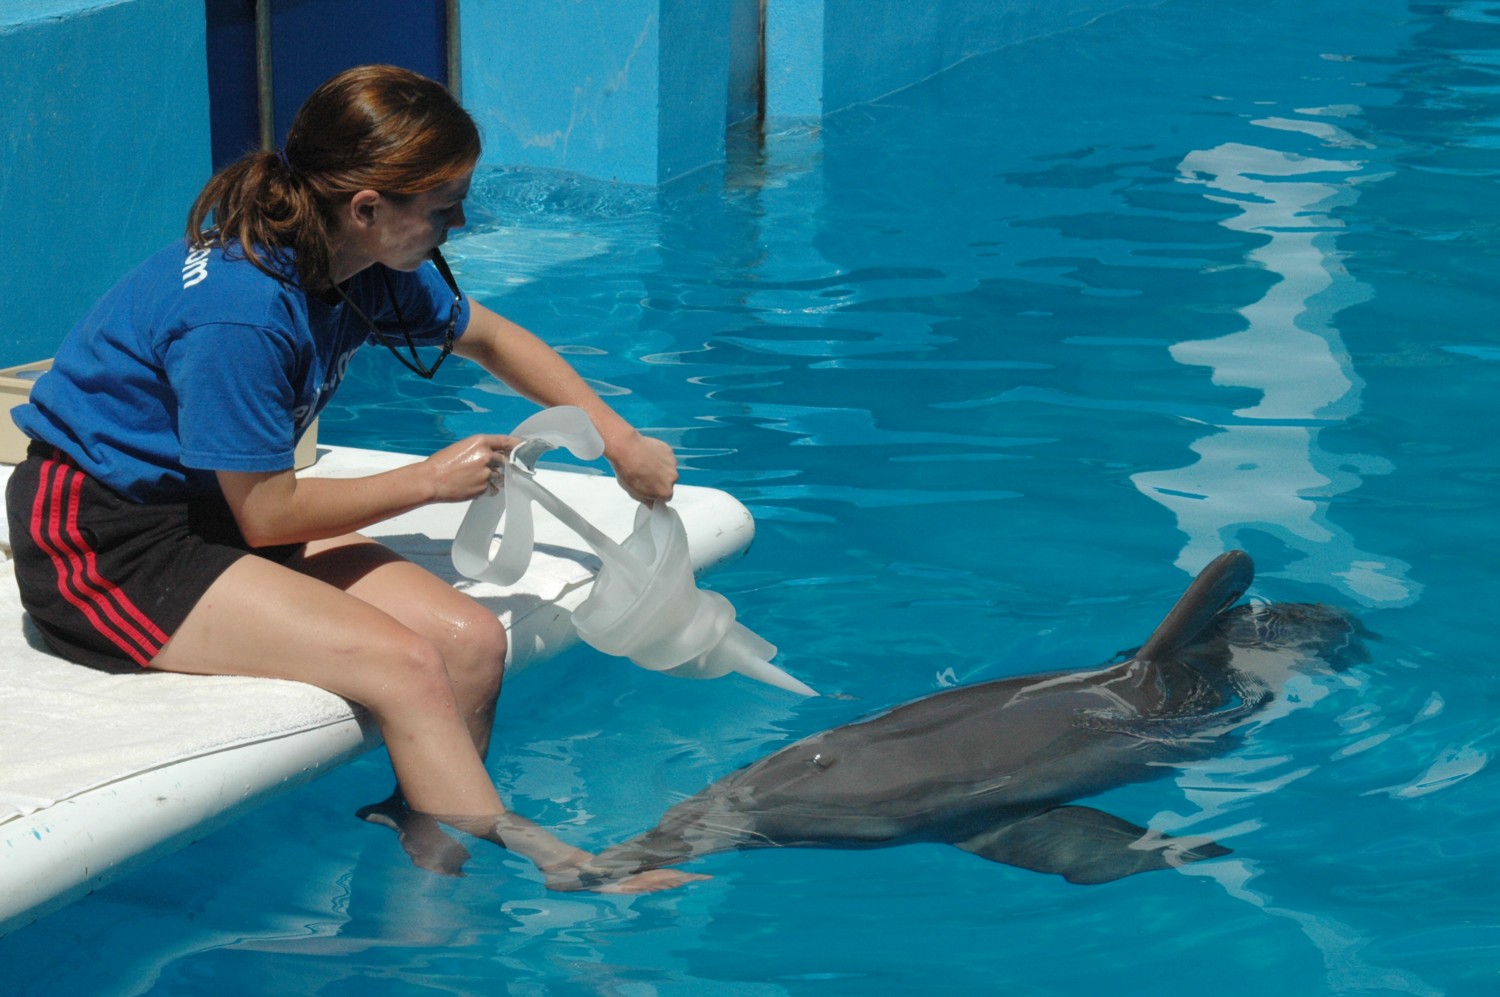 Where can you find Winter the dolphin?